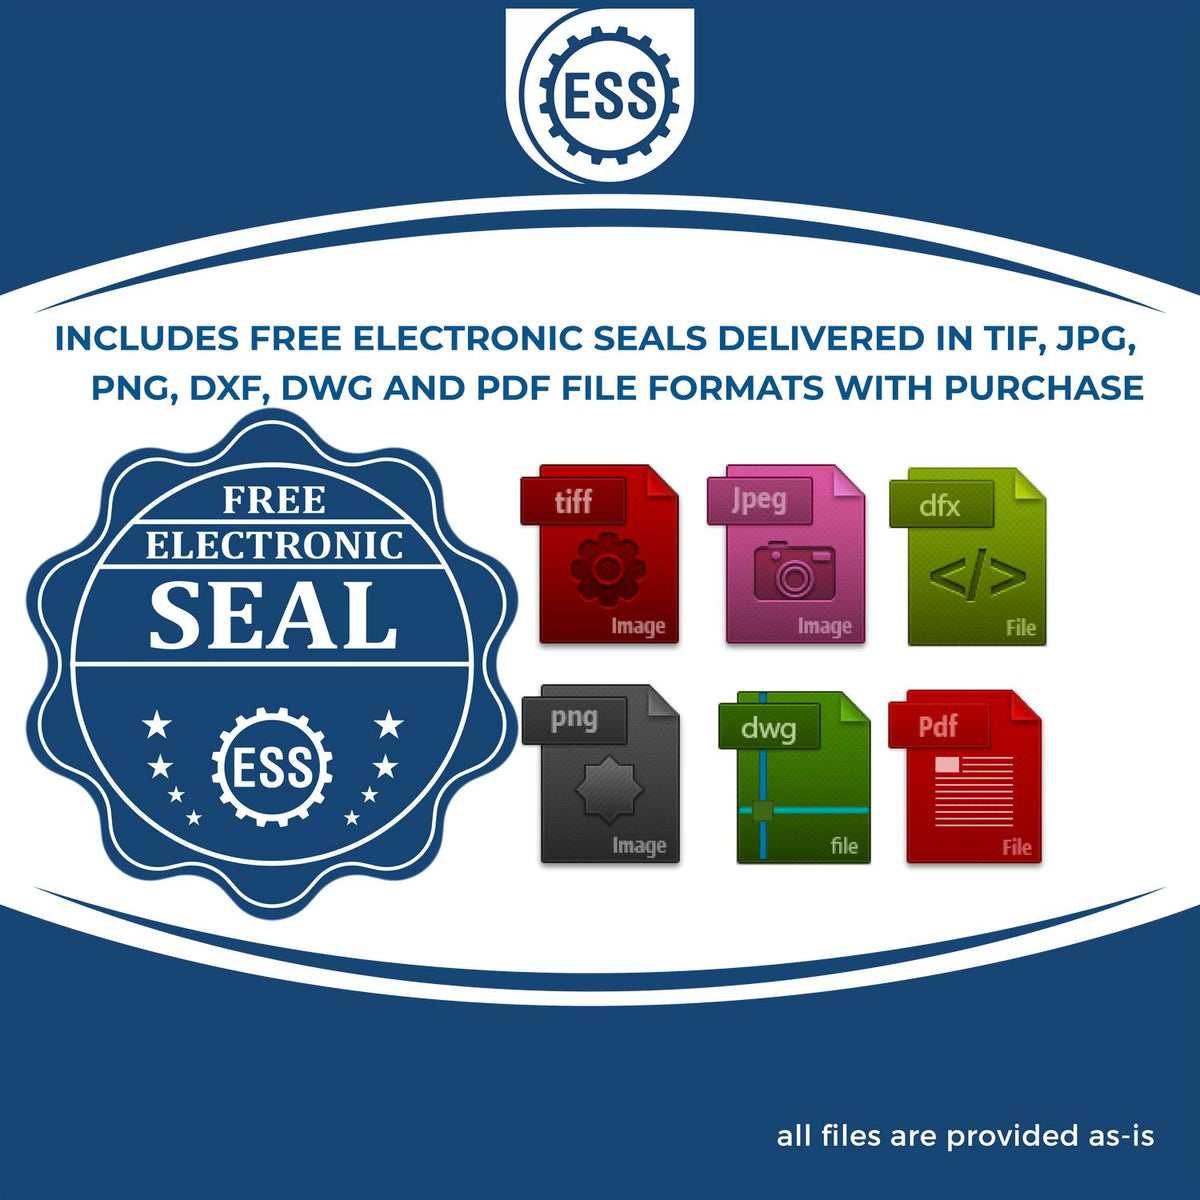 An infographic for the free electronic seal for the State of New Jersey Extended Long Reach Engineer Seal illustrating the different file type icons such as DXF, DWG, TIF, JPG and PNG.